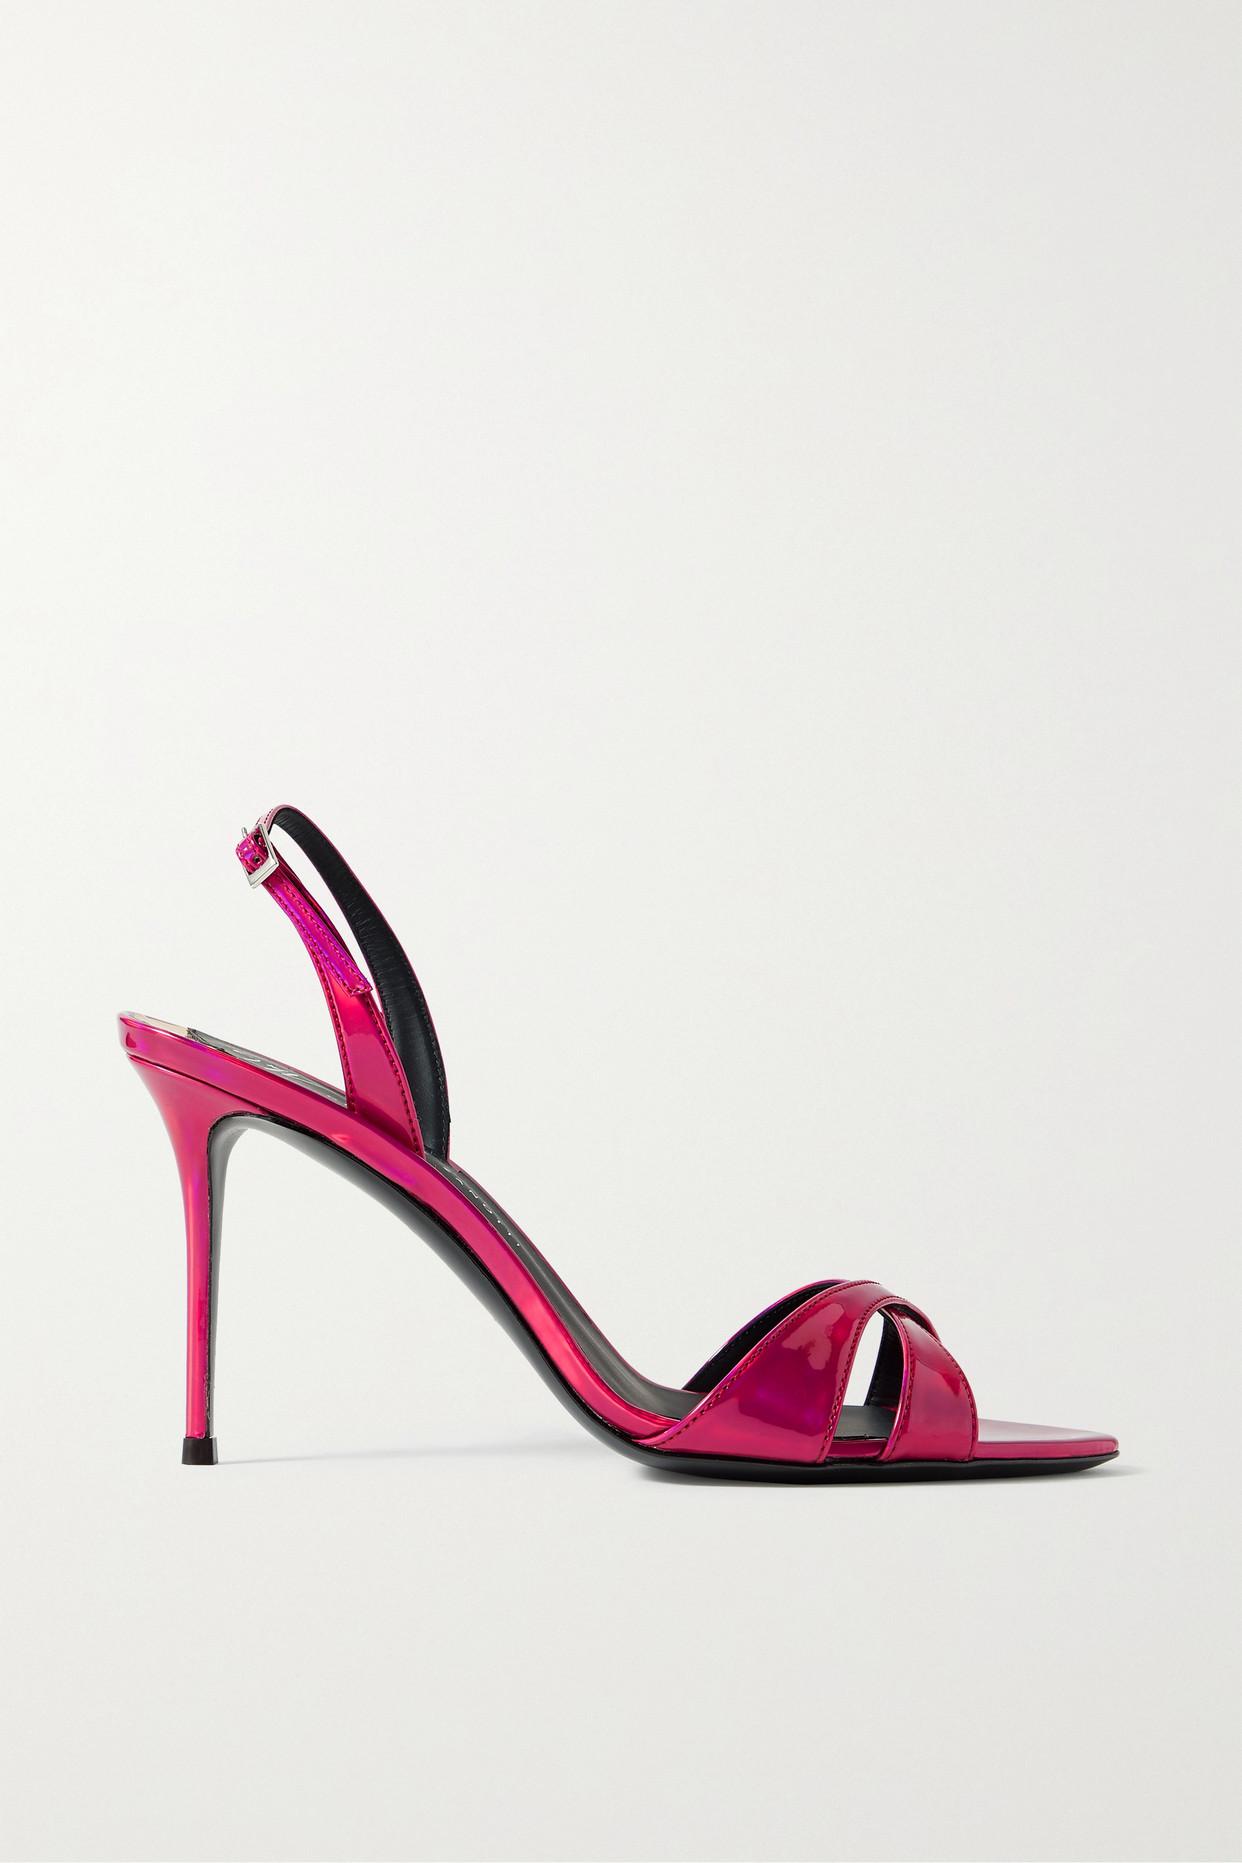 Giuseppe Zanotti Clandestino Glossed-leather Sandals in Pink | Lyst